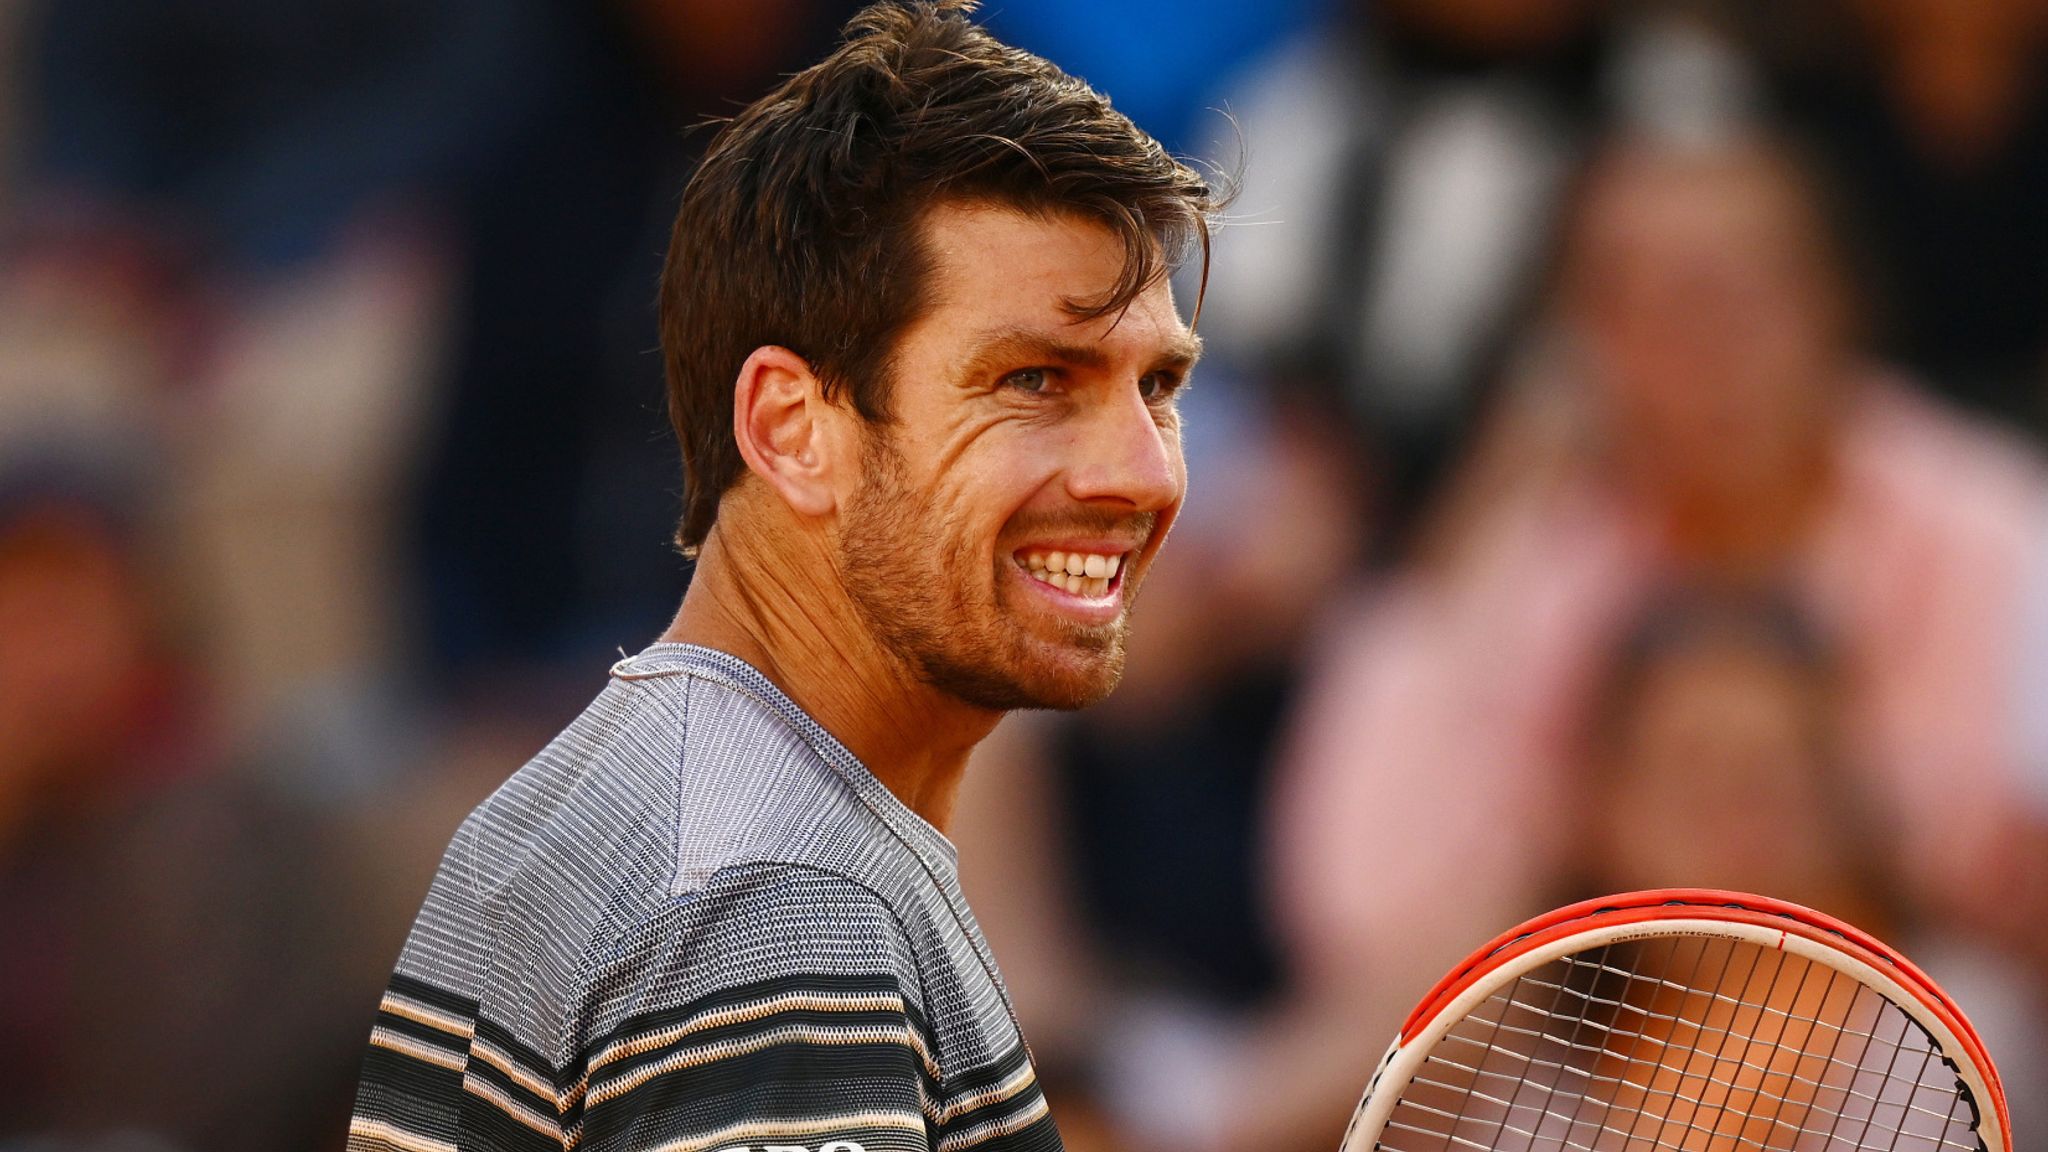 French Open Cameron Norrie knocked out by Lorenzo Musetti while Novak Djokovic battles through Tennis News Sky Sports